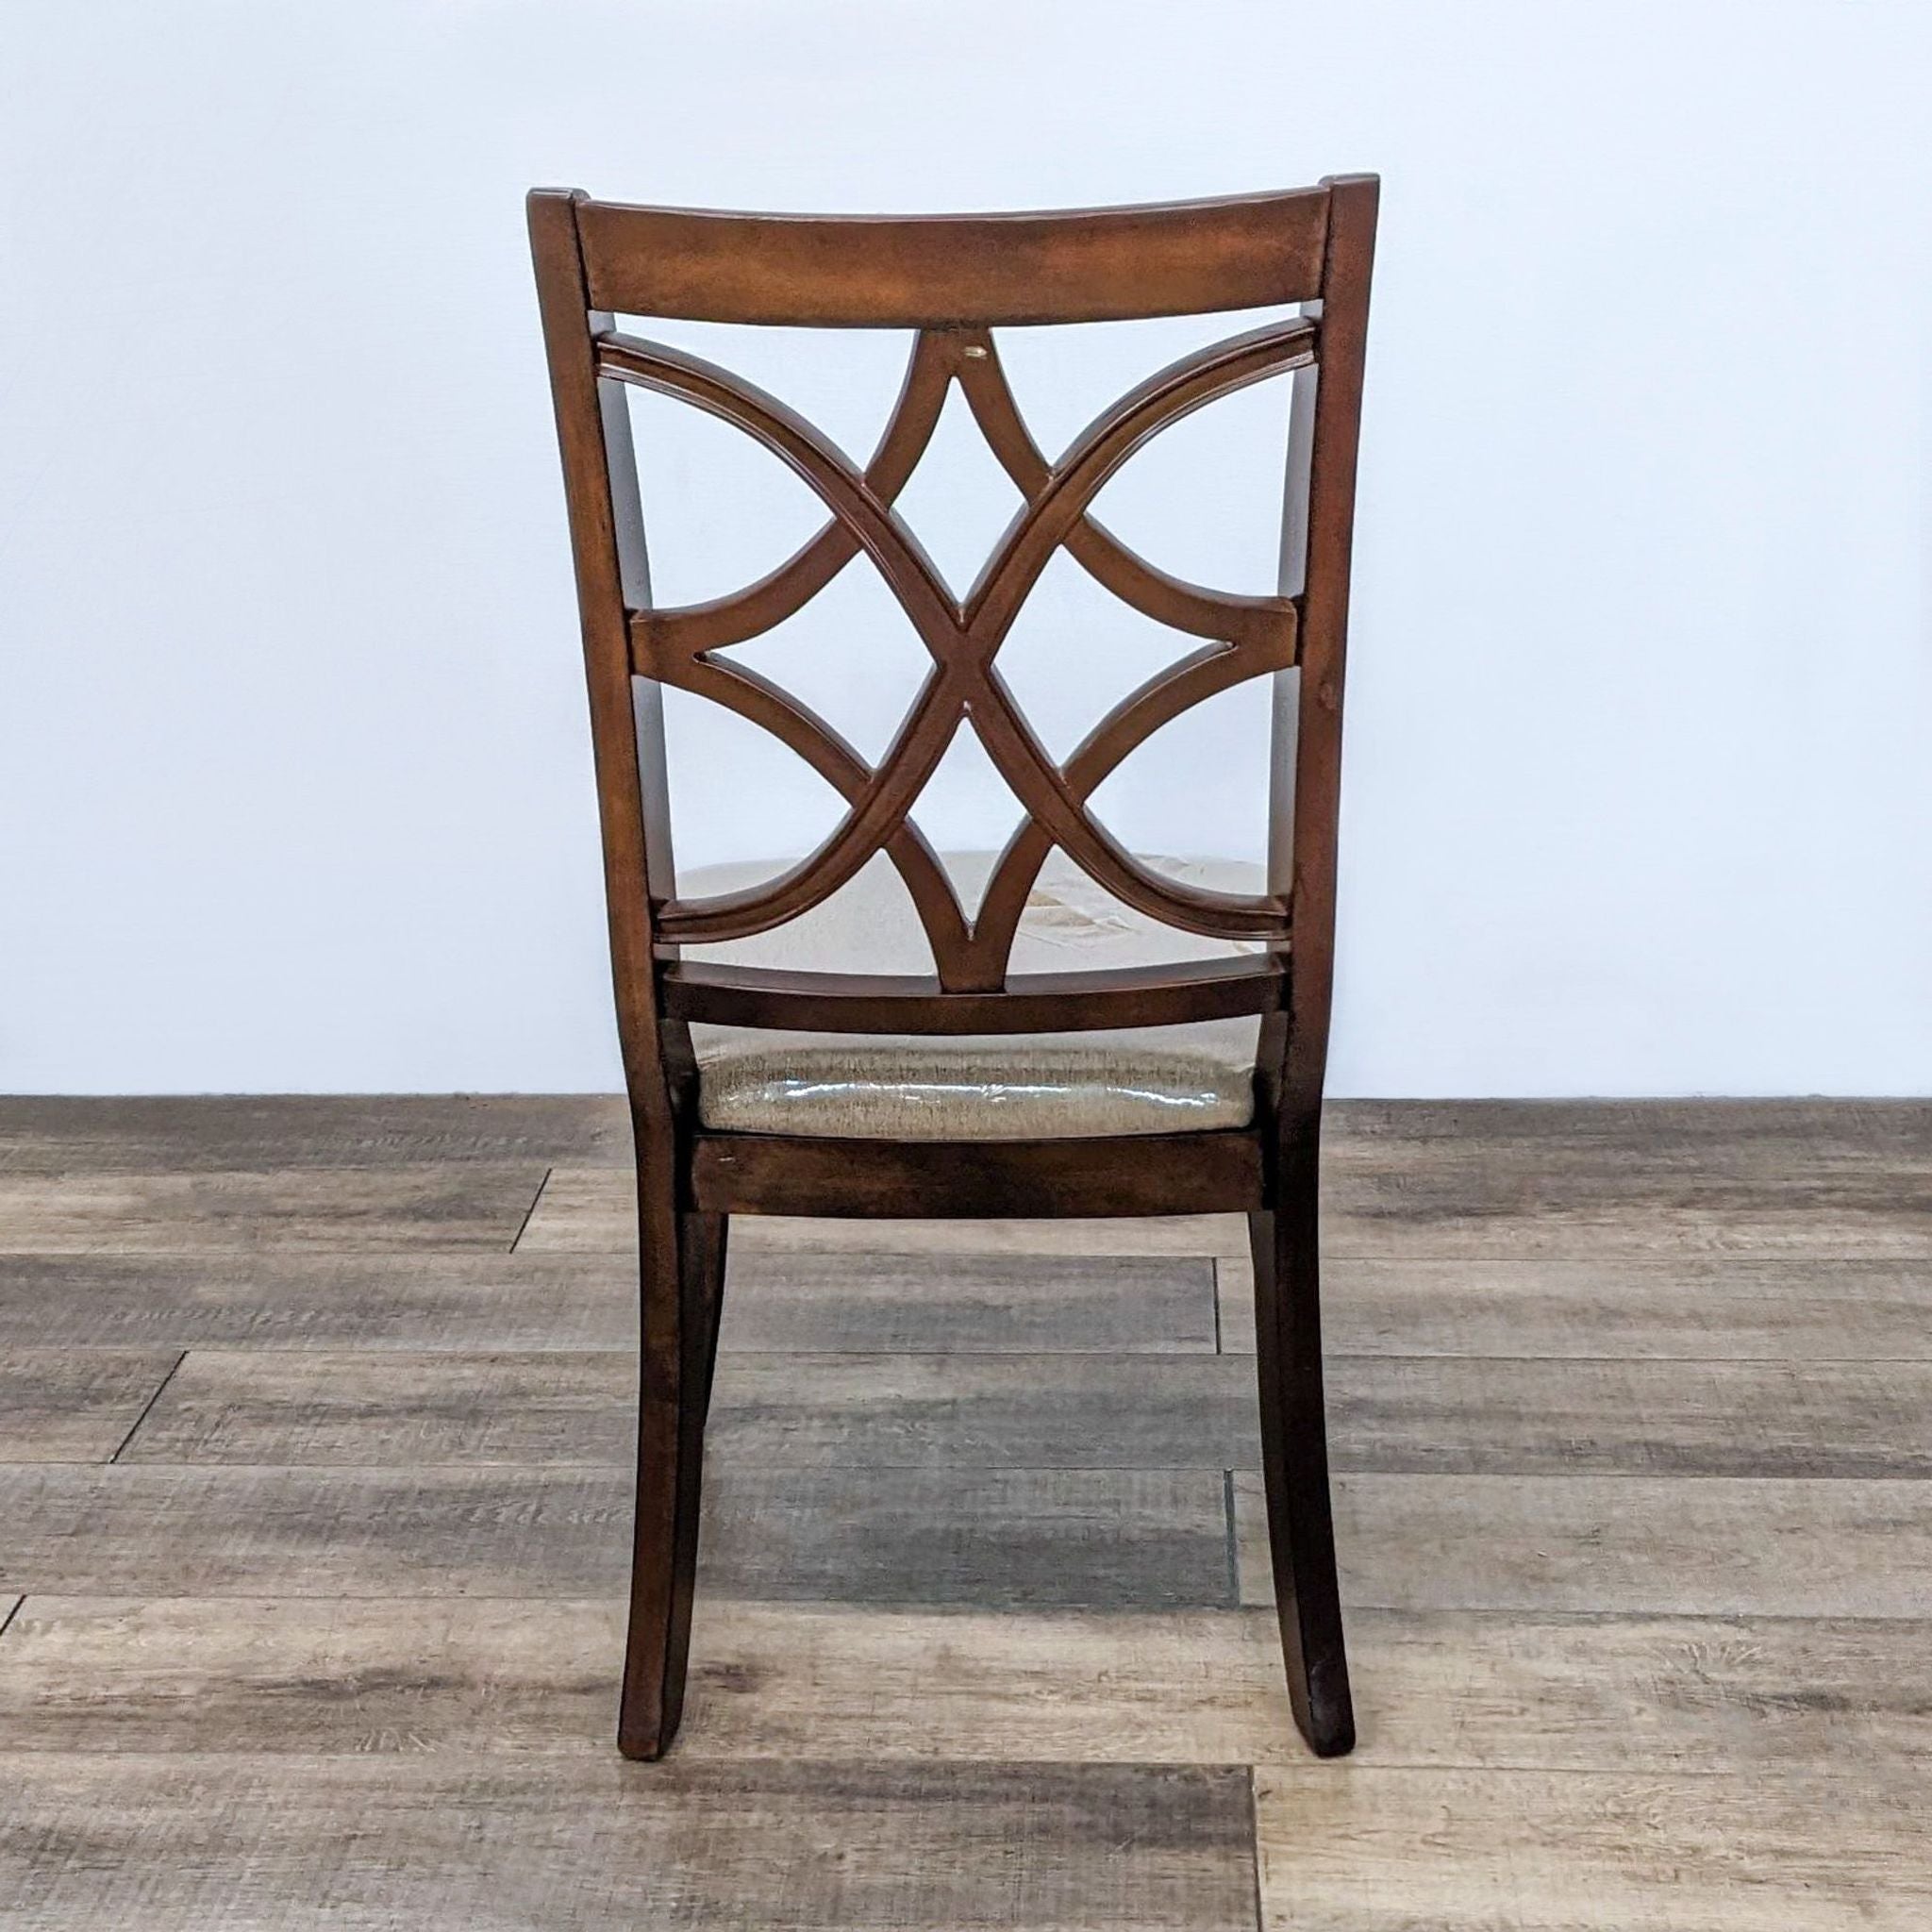 Reperch brand contemporary dining chair with lattice back and beige upholstered seat on a wooden floor.